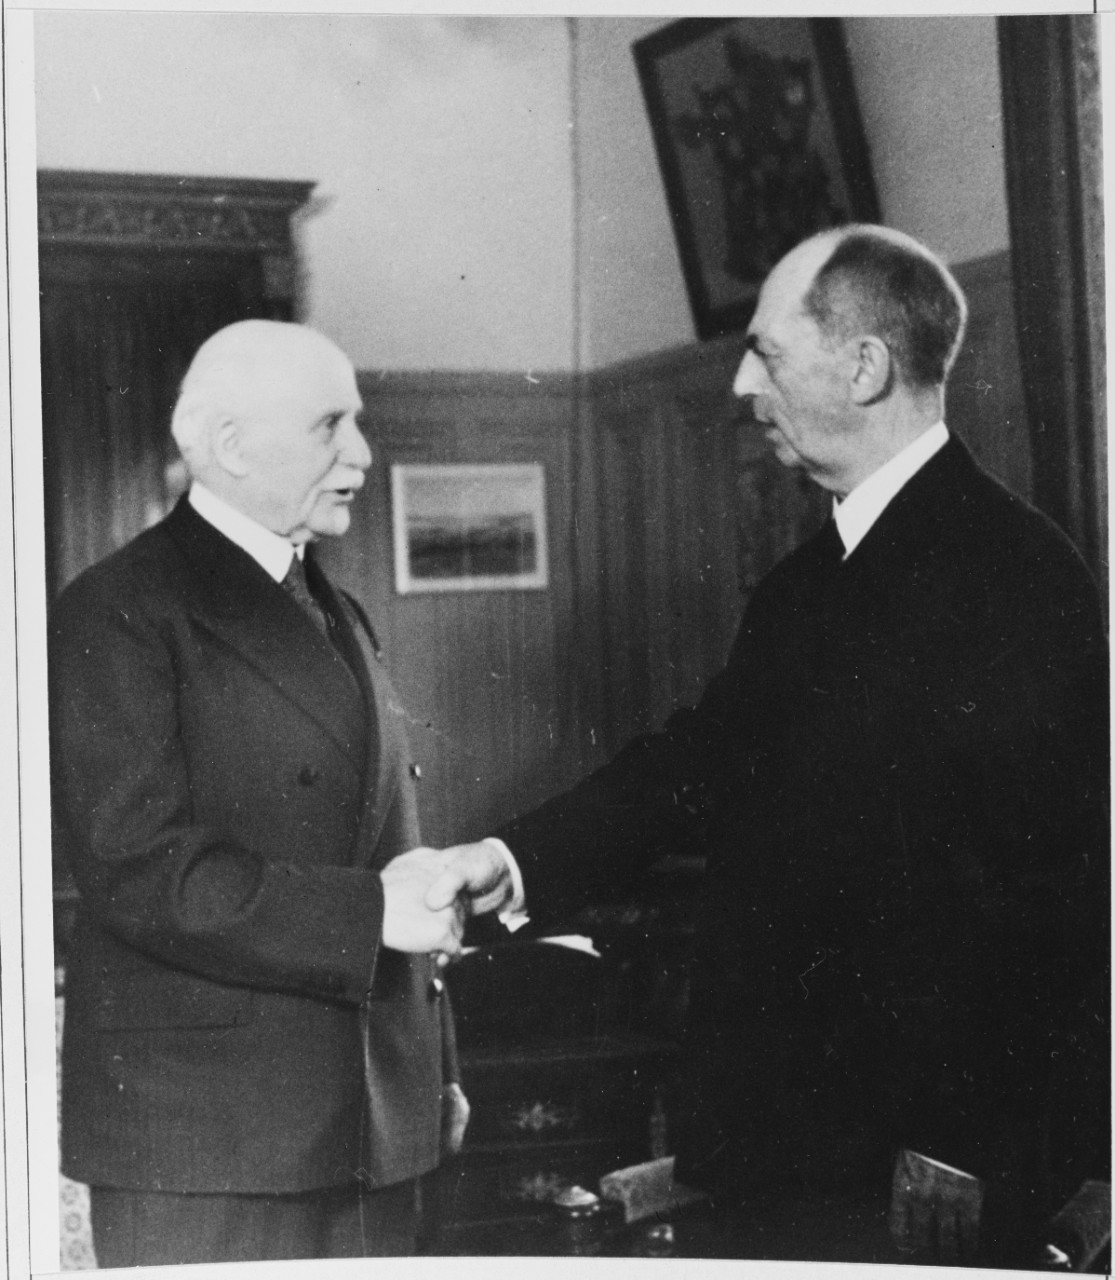 Adm Leahy greeted by Monsieur Petain the French writer. April 27, 1942